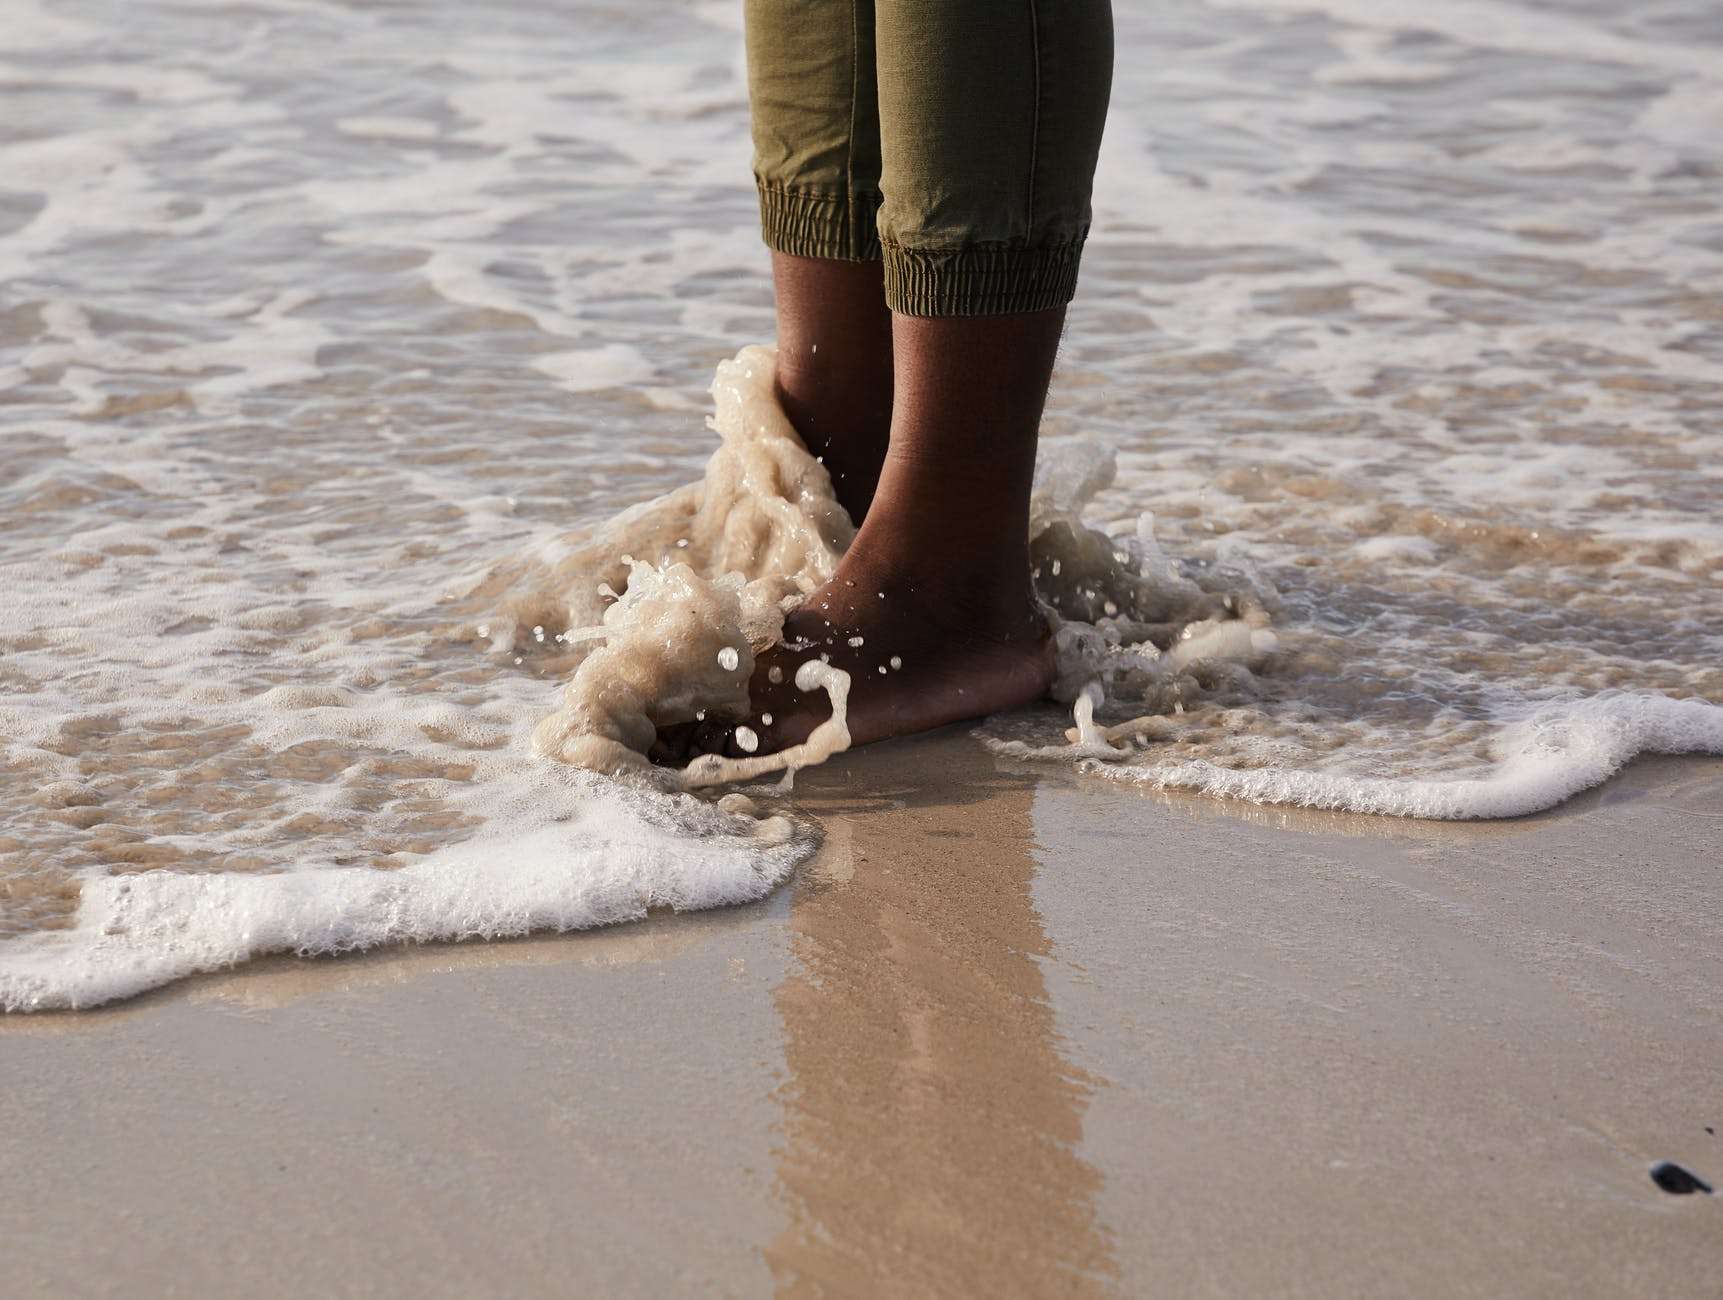 How a Regular Beach Trip Could Bring Damage to Your Drain